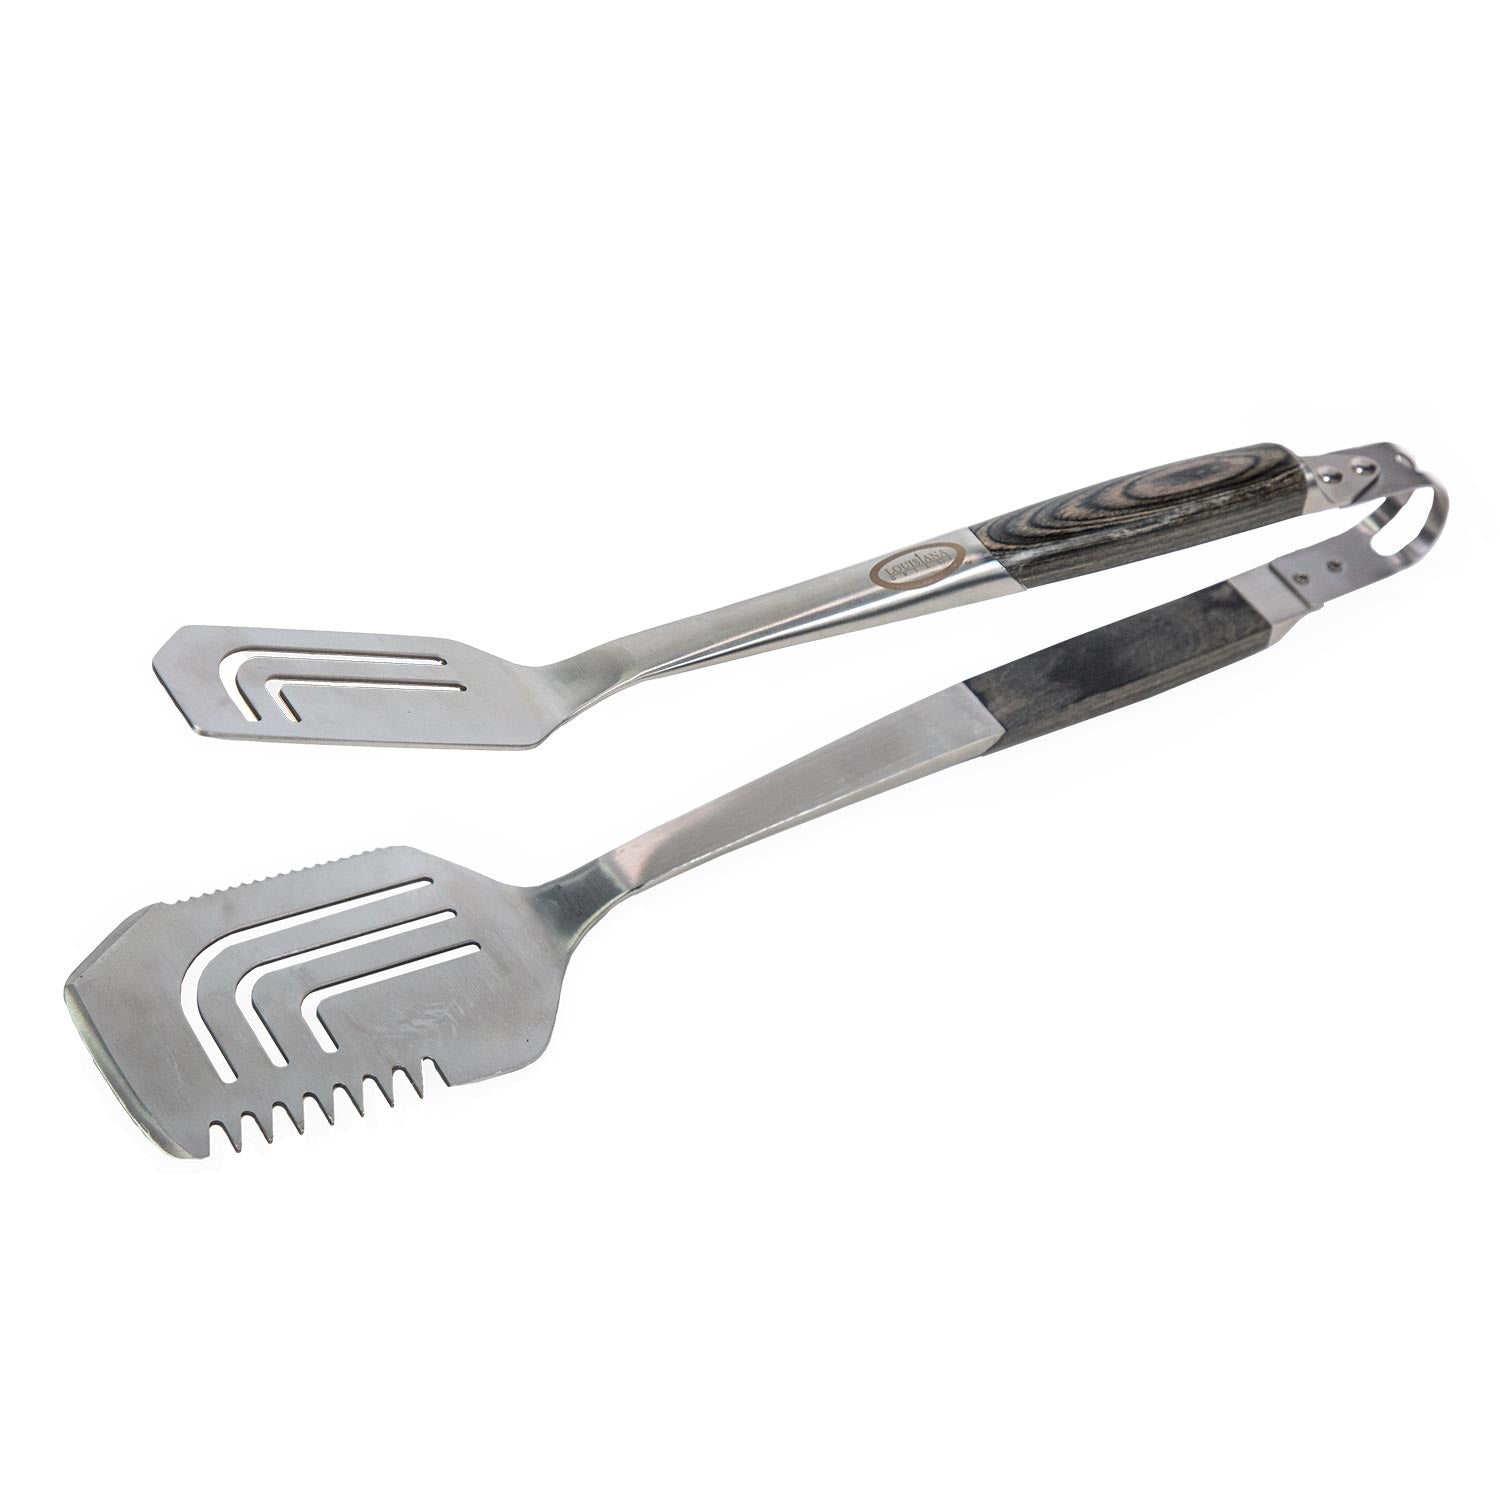 Louisiana Grills 40244 All-In-One BBQ Tool